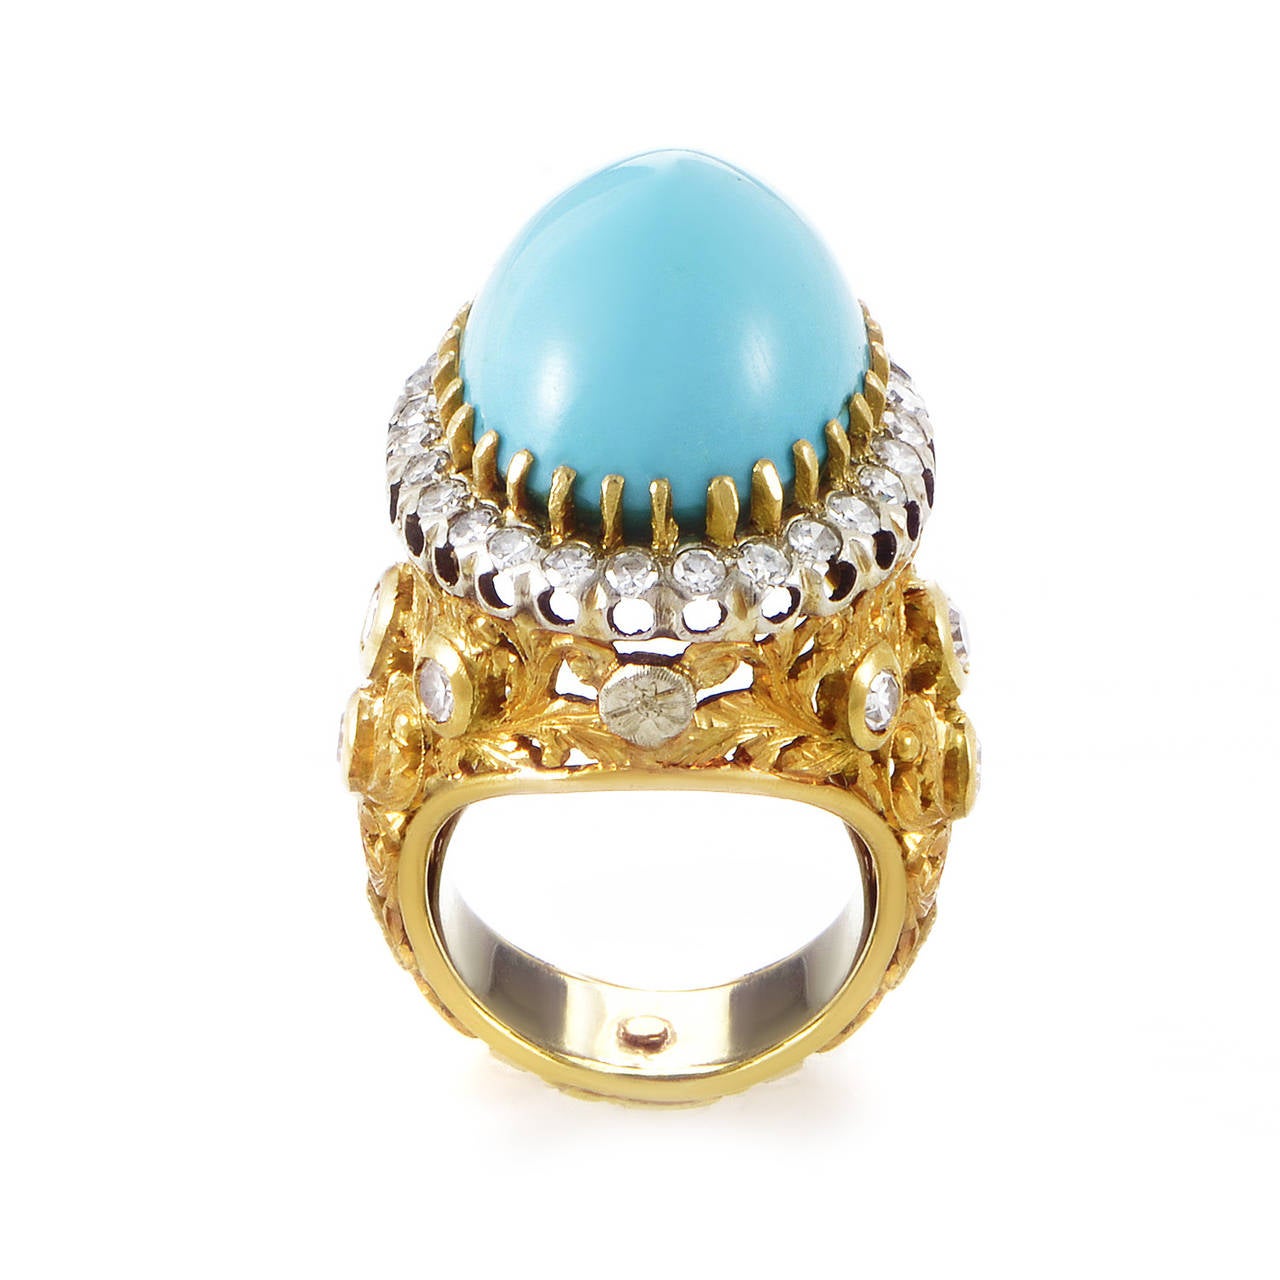 Regal and refined are the perfect words to describe this lustrous ring. The ring boasts elegantly carved shanks set with diamond accents. The bezel is also set with diamonds and holds a turquoise cabochon main stone in place with prongs.

Ring